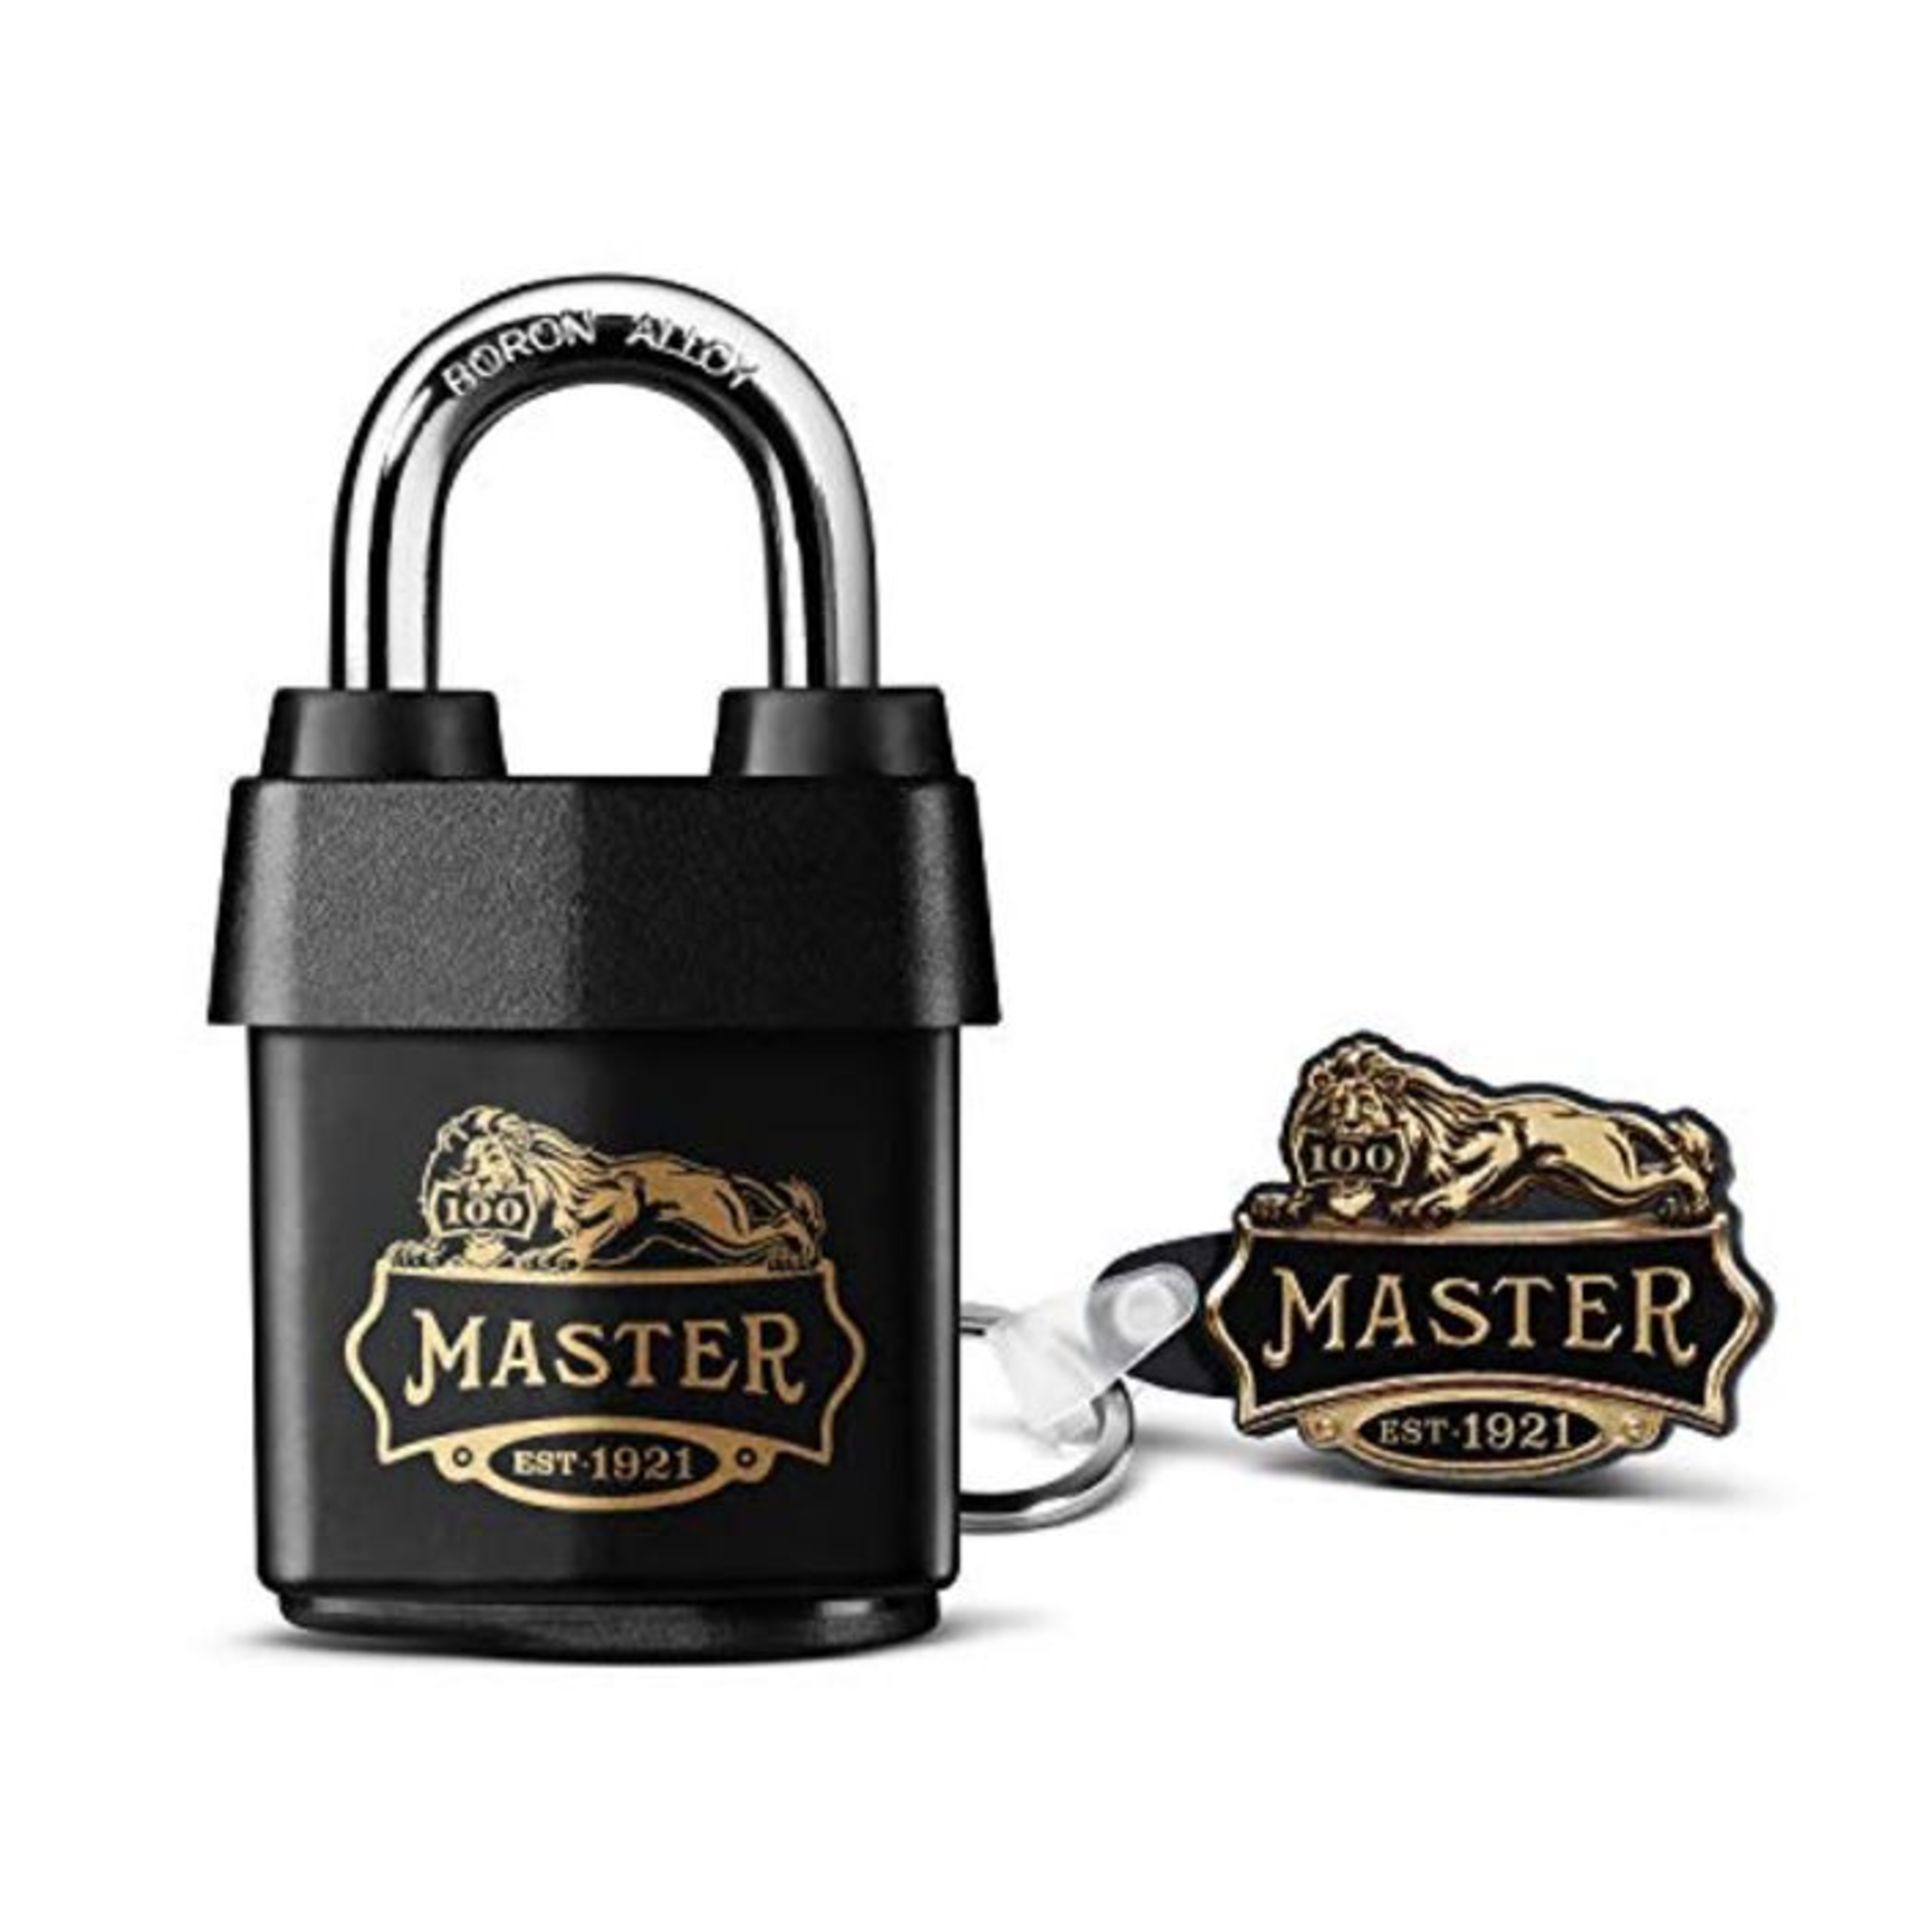 Master Lock 1921EURDCC Heavy Duty Outdoor Padlock with 100 Year Logo Printed, Black, 9